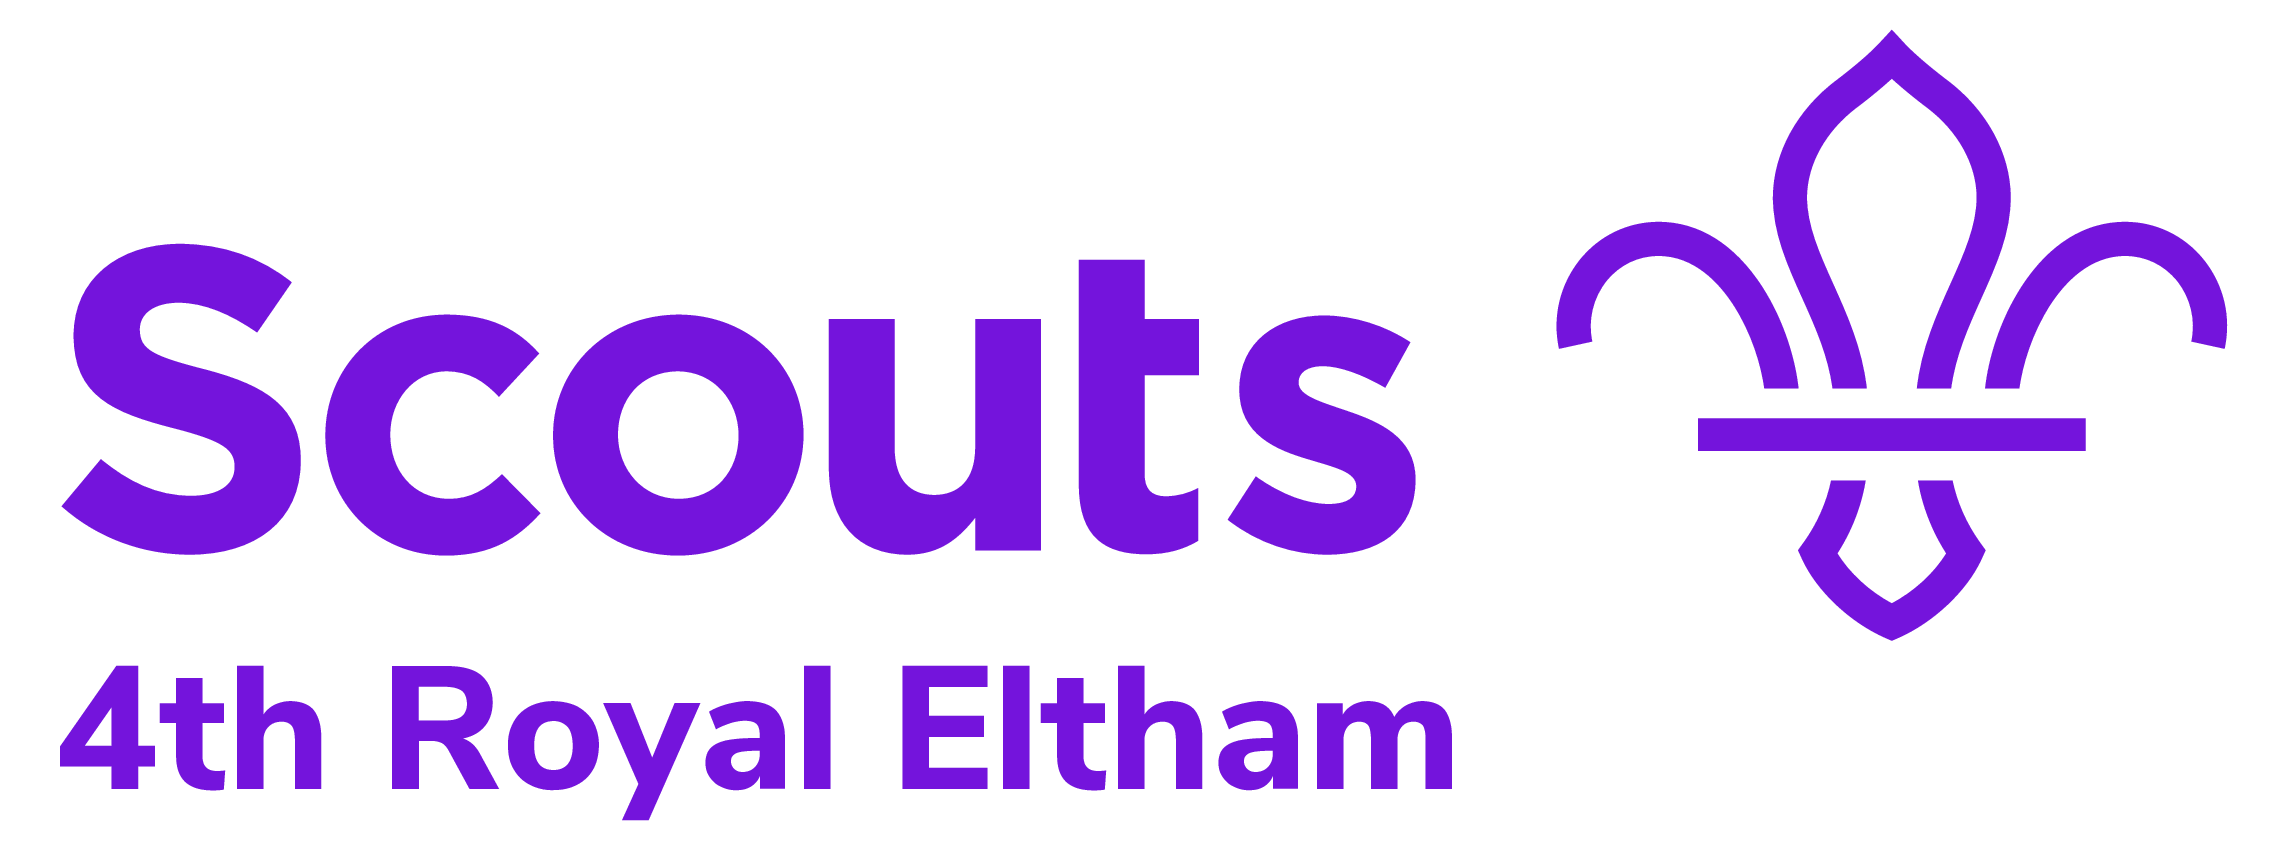 4th Royal Eltham Scout Group